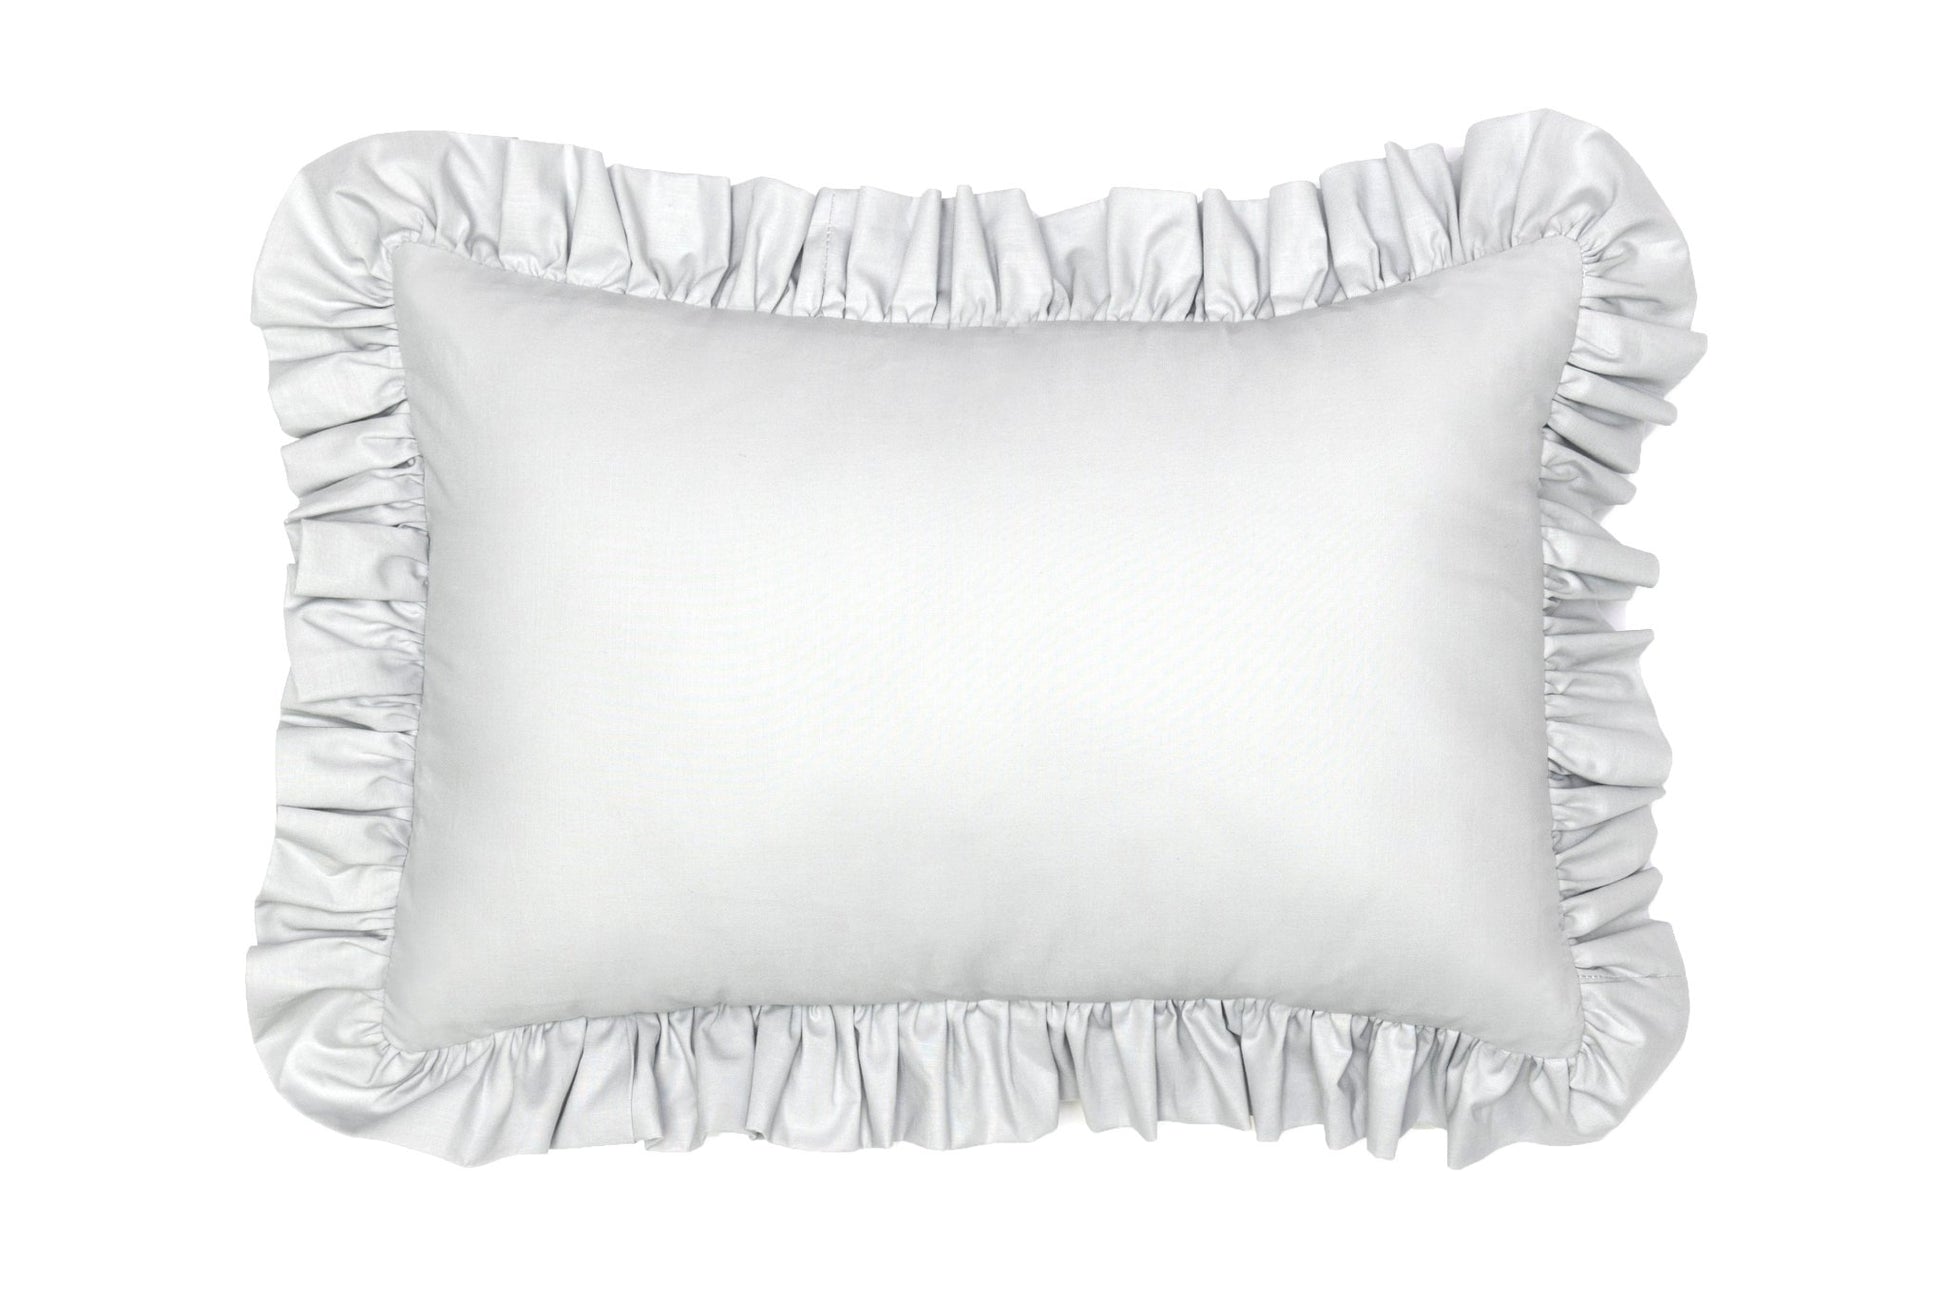 Solid Silver Gray Decorative Pillow with Ruffle - New Arrivals Inc